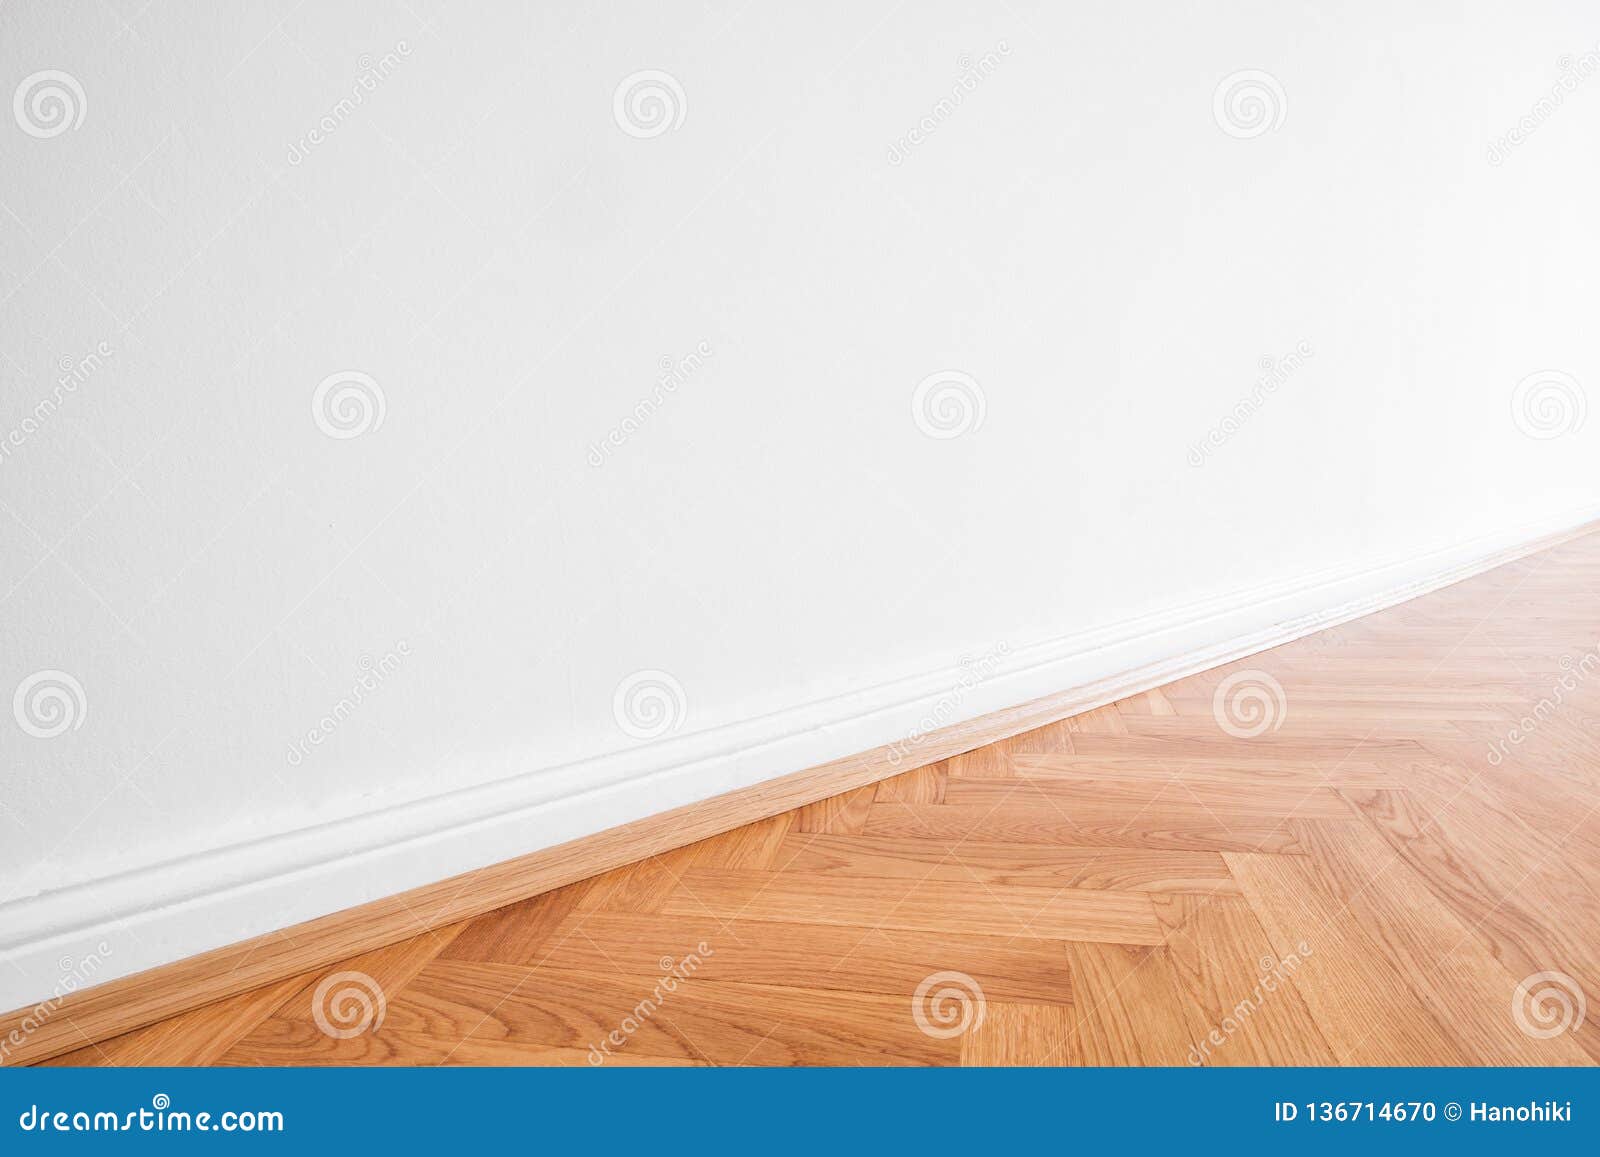 primed white wall and wooden parquet floor - apartment interior background